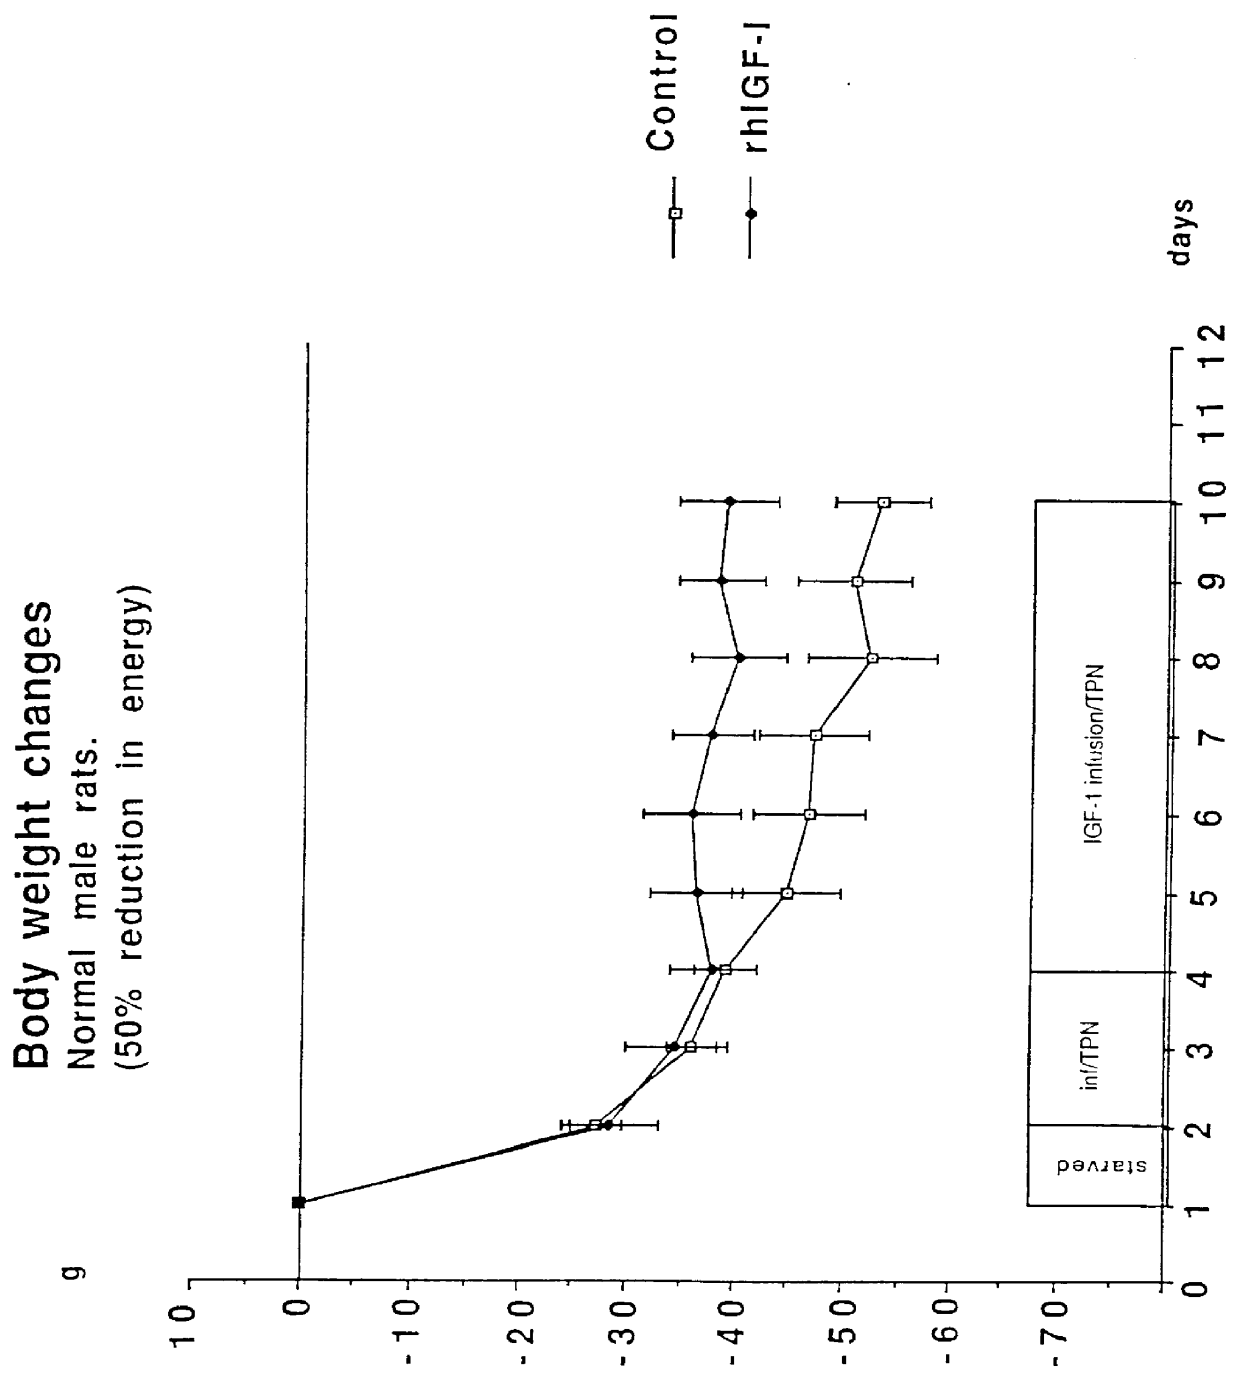 Treatment of catabolic states using authentic IGF-1 and hypocaloric amount of nutrients